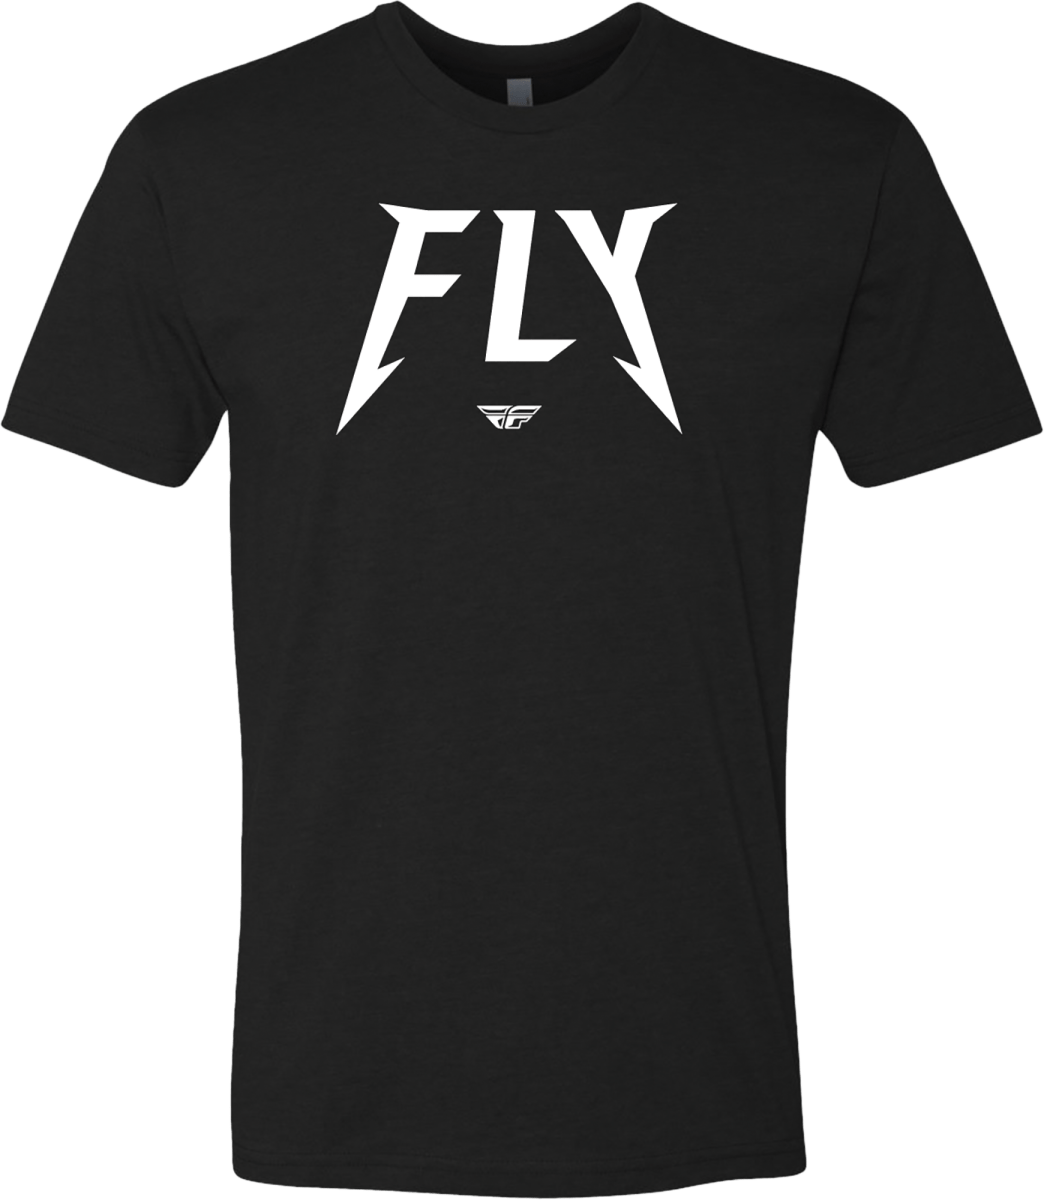 FLY RACING - YOUTH FLY MASTER TEE - 354-0320YS - 191361438417